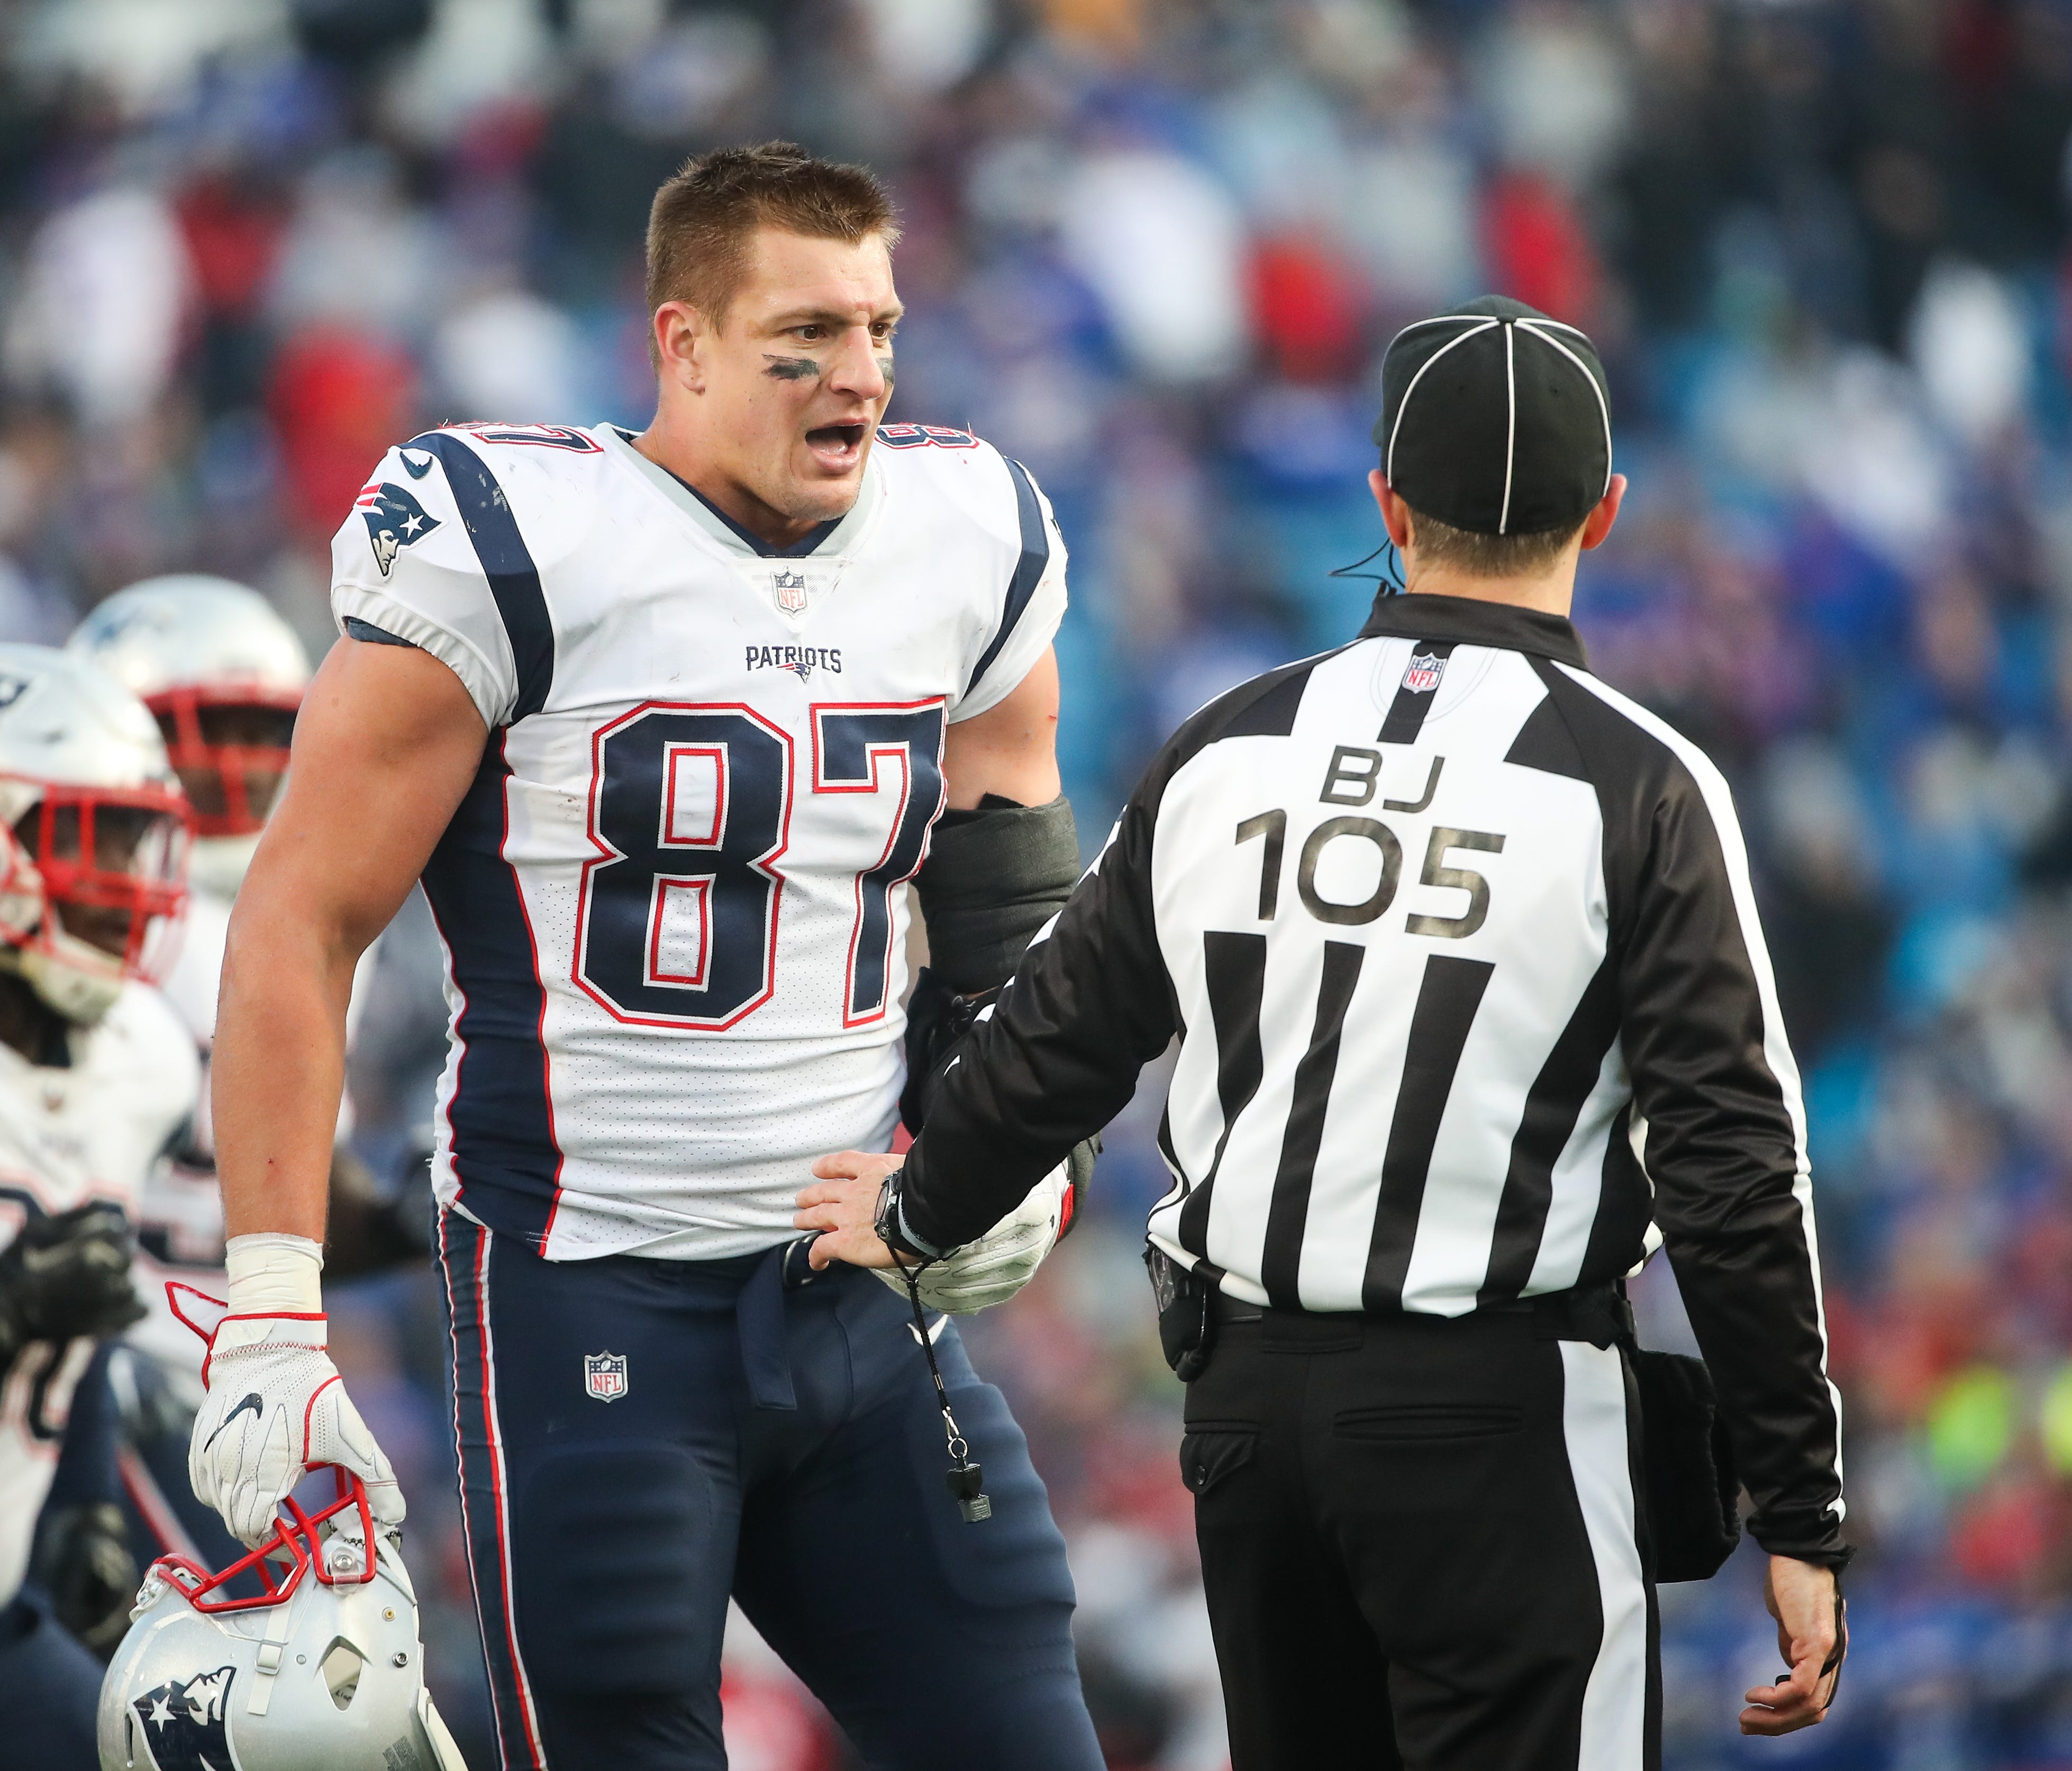 ORCHARD PARK, NY - DECEMBER 3:  Rob Gronkowski #87 of the New England Patriots talks with back judge Dino Paganelli #105 during the fourth quarter against the Buffalo Bills on December 3, 2017 at New Era Field in Orchard Park, New York.  (Photo by To